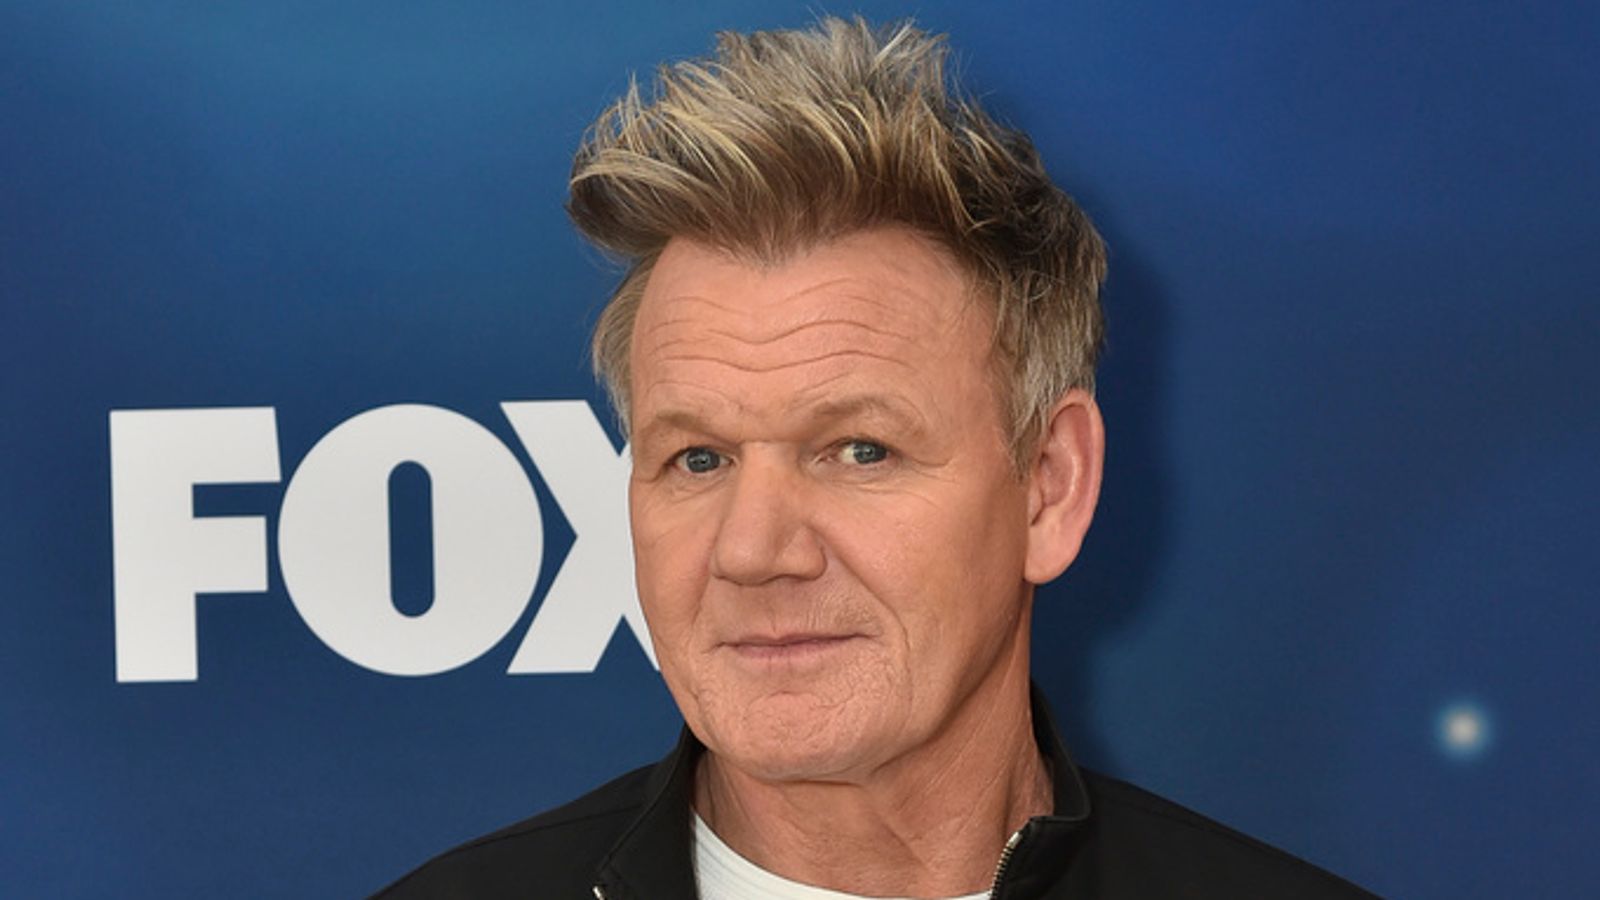 Gordon Ramsay 'lucky to be alive' after bike accident